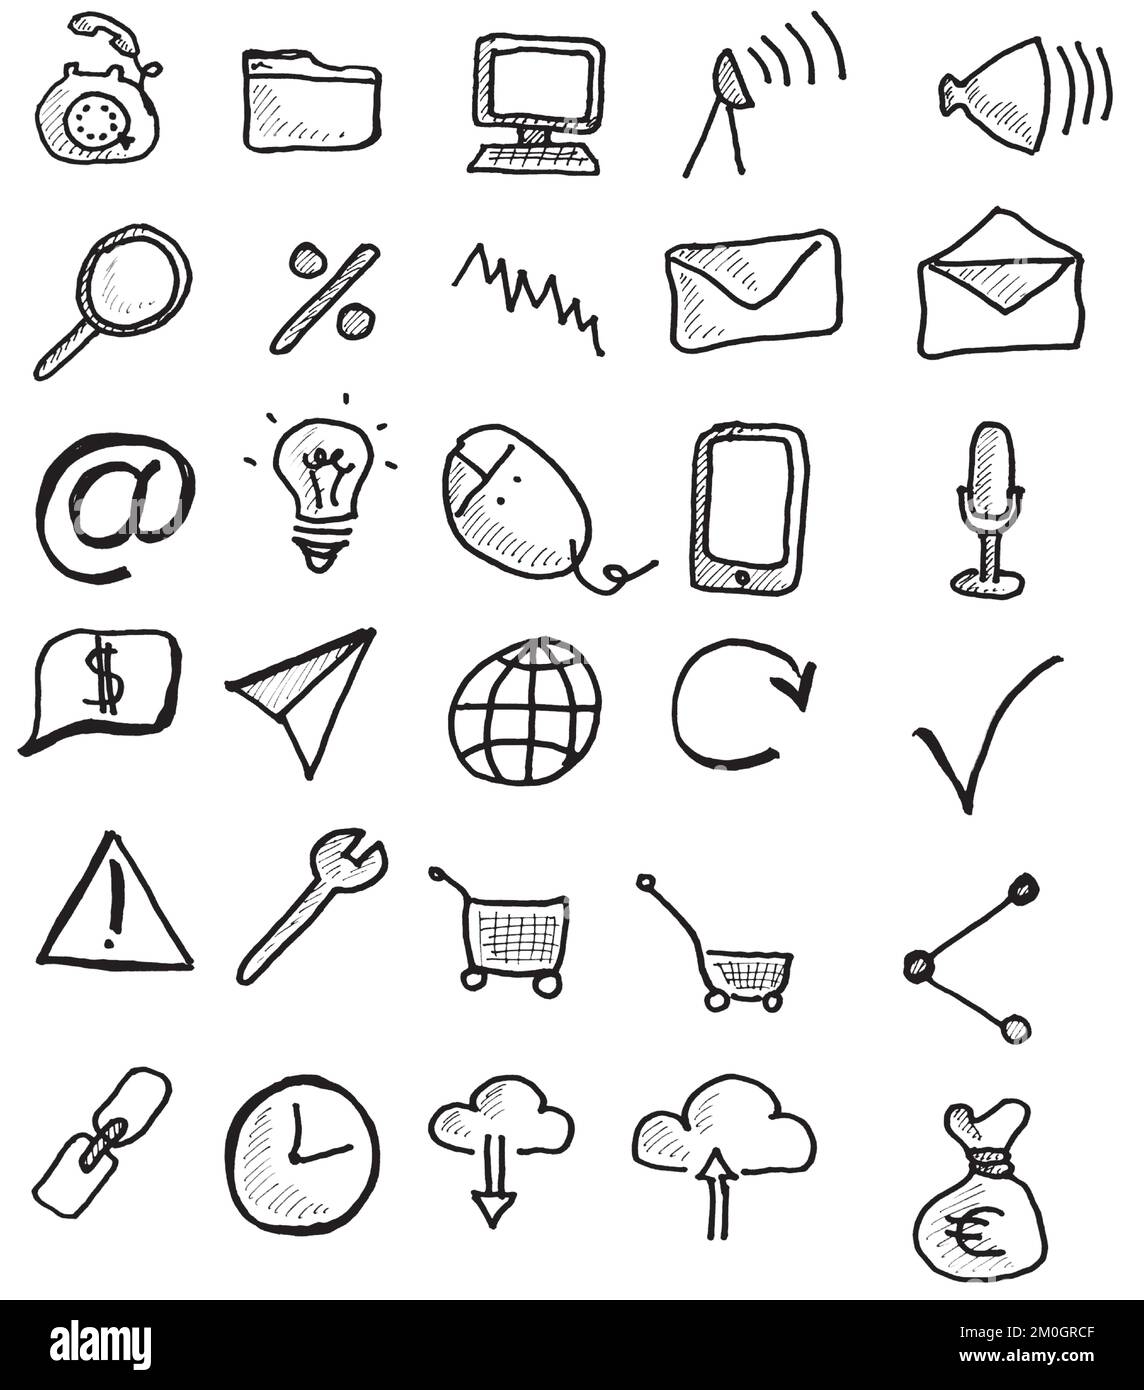 Business freehand drawn icon set Stock Vector